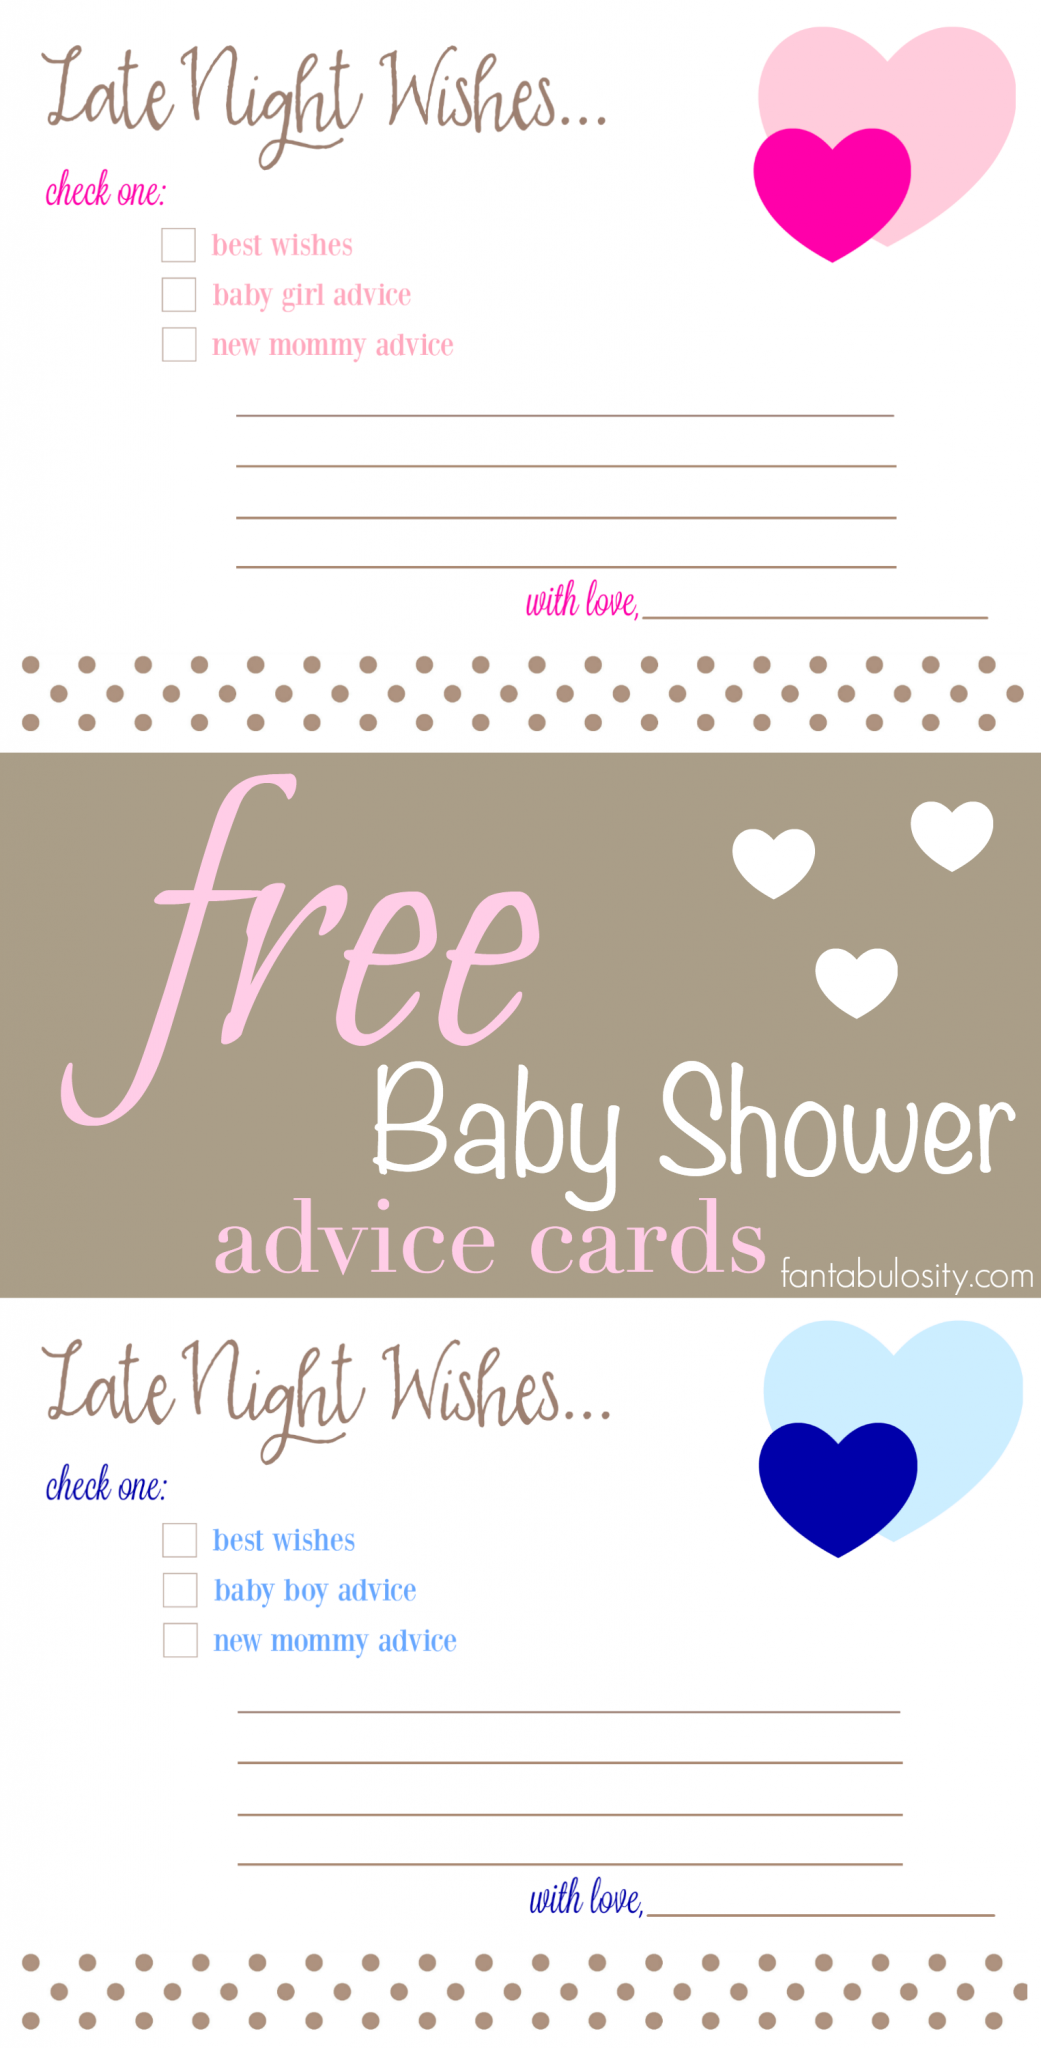 Full Size of Baby Shower:stylish Baby Shower Wishes Picture Inspirations Baby Shower Wishes As Well As Baby Shower Greeting Cards With Baby Shower Wording Plus Baby Shower Gift Ideas Together With Baby Shower Gift List